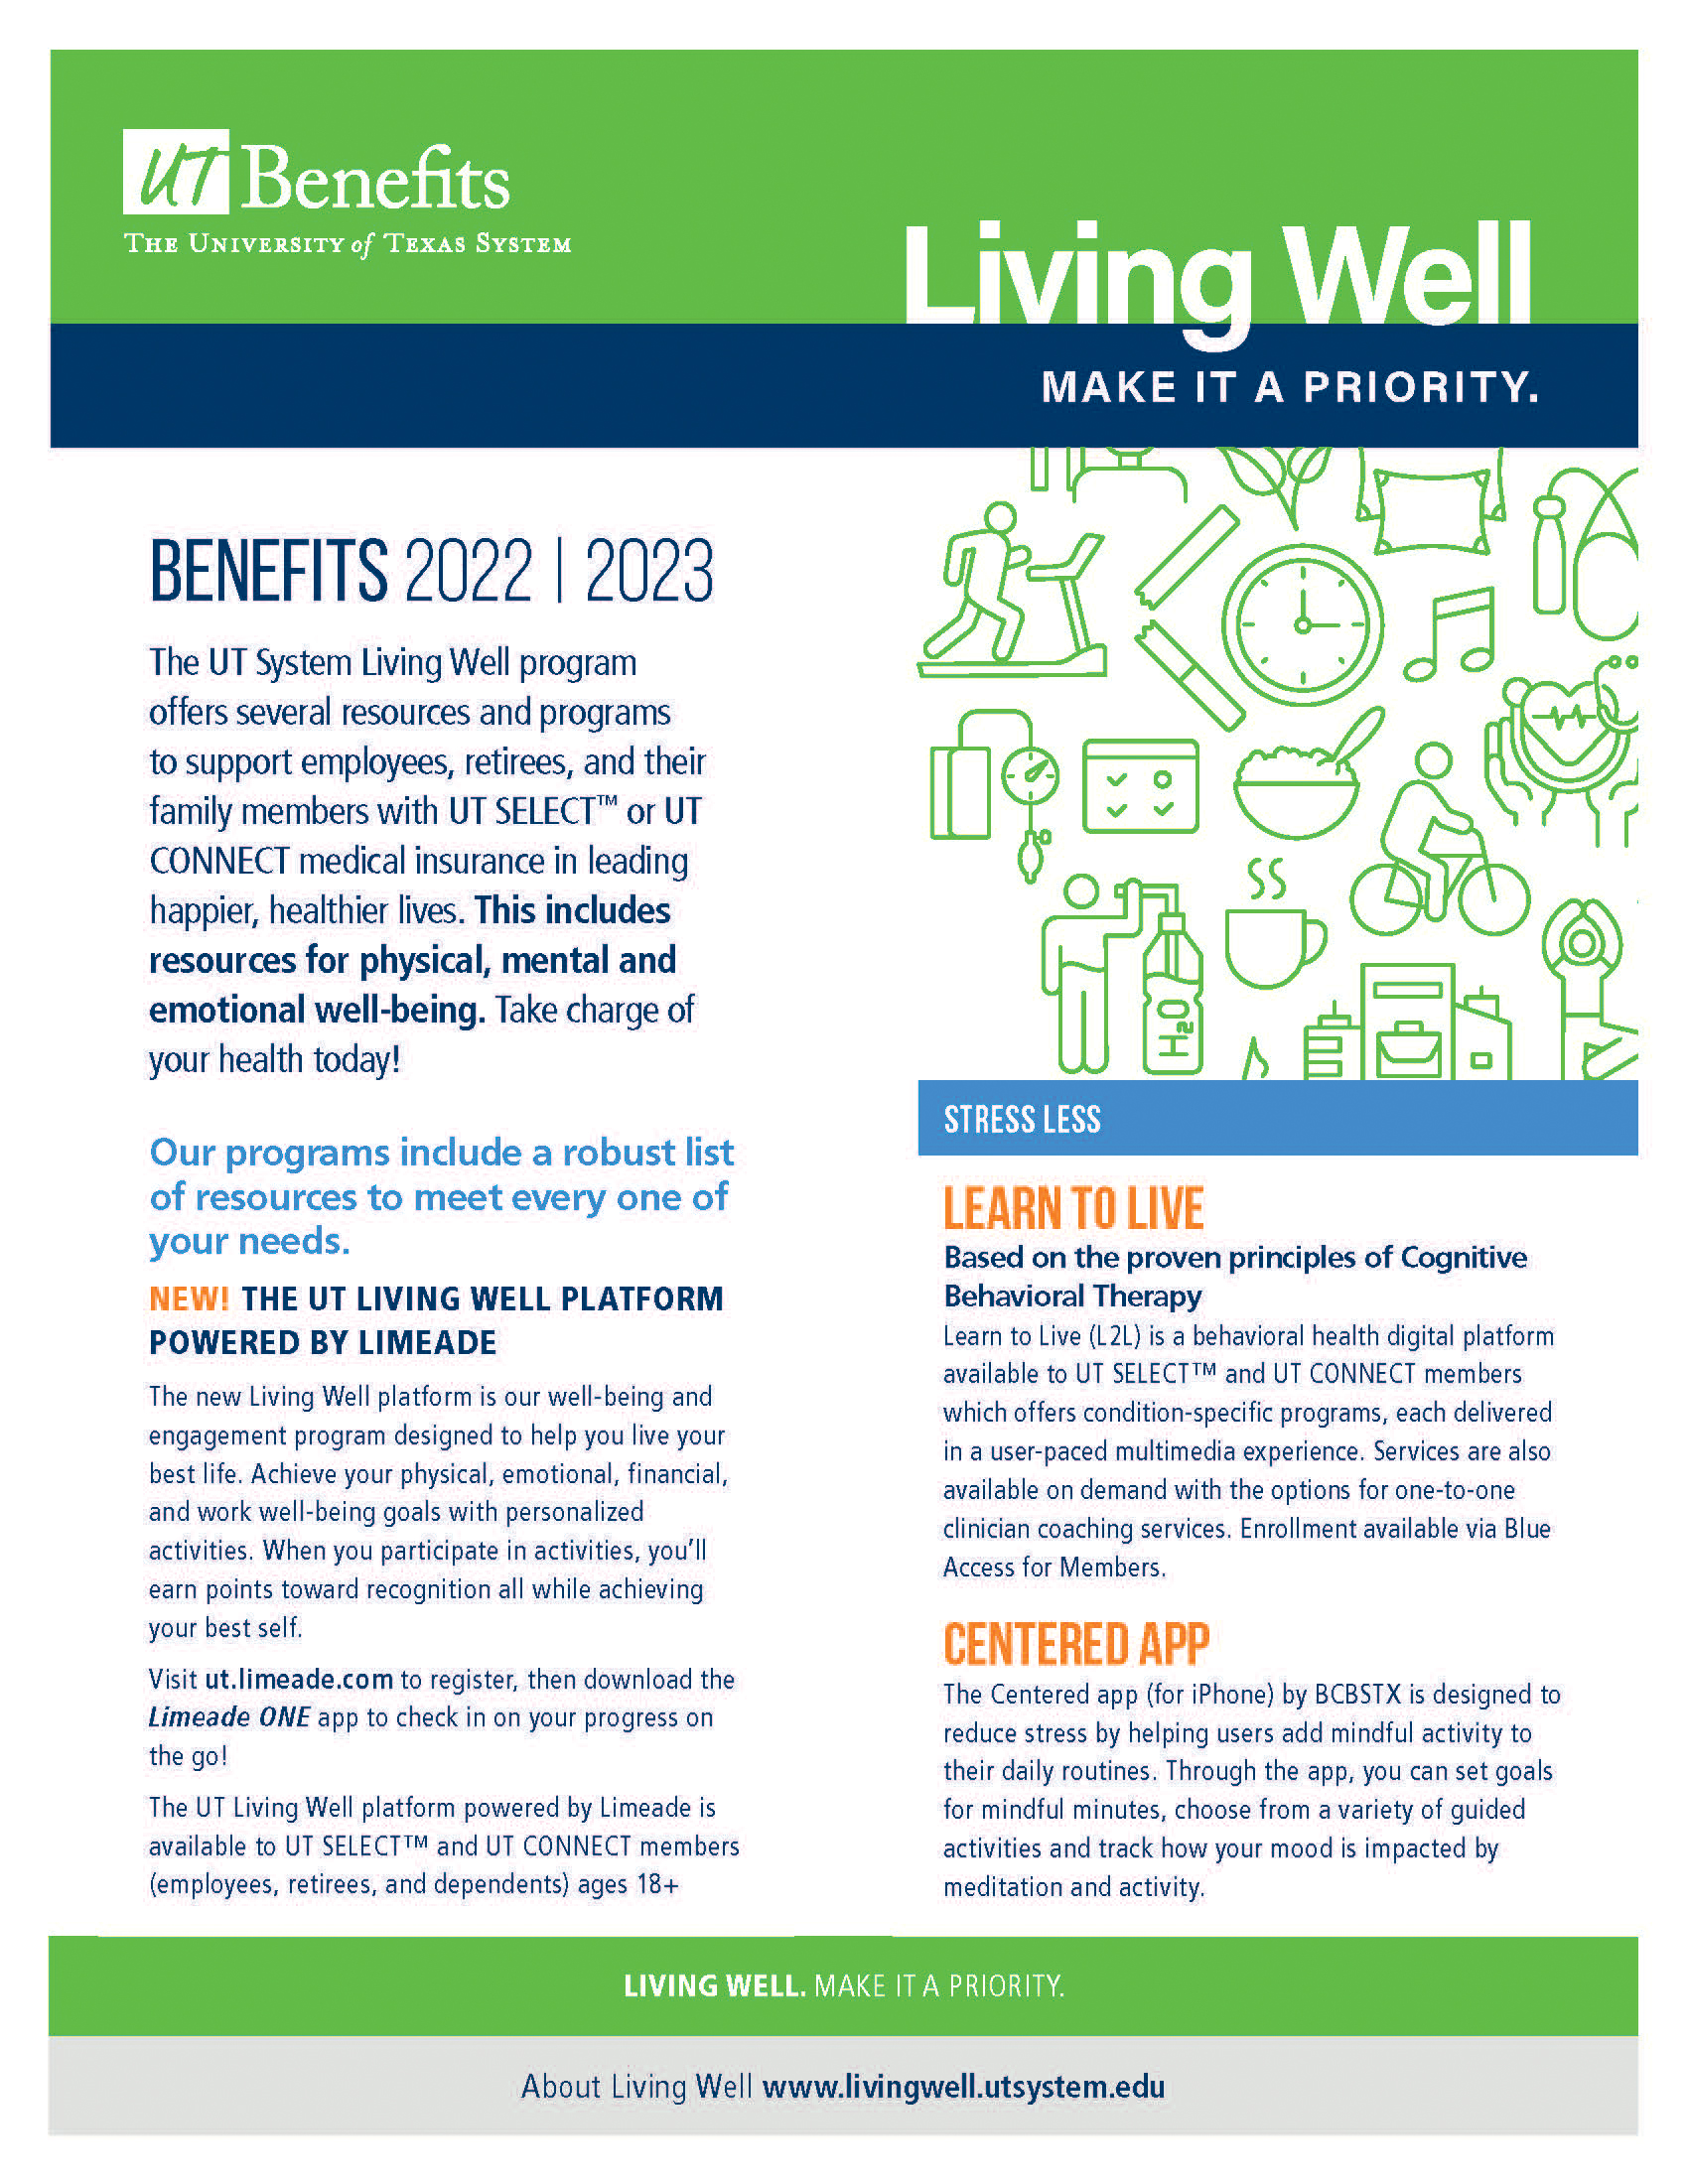 living well guide cover sheet